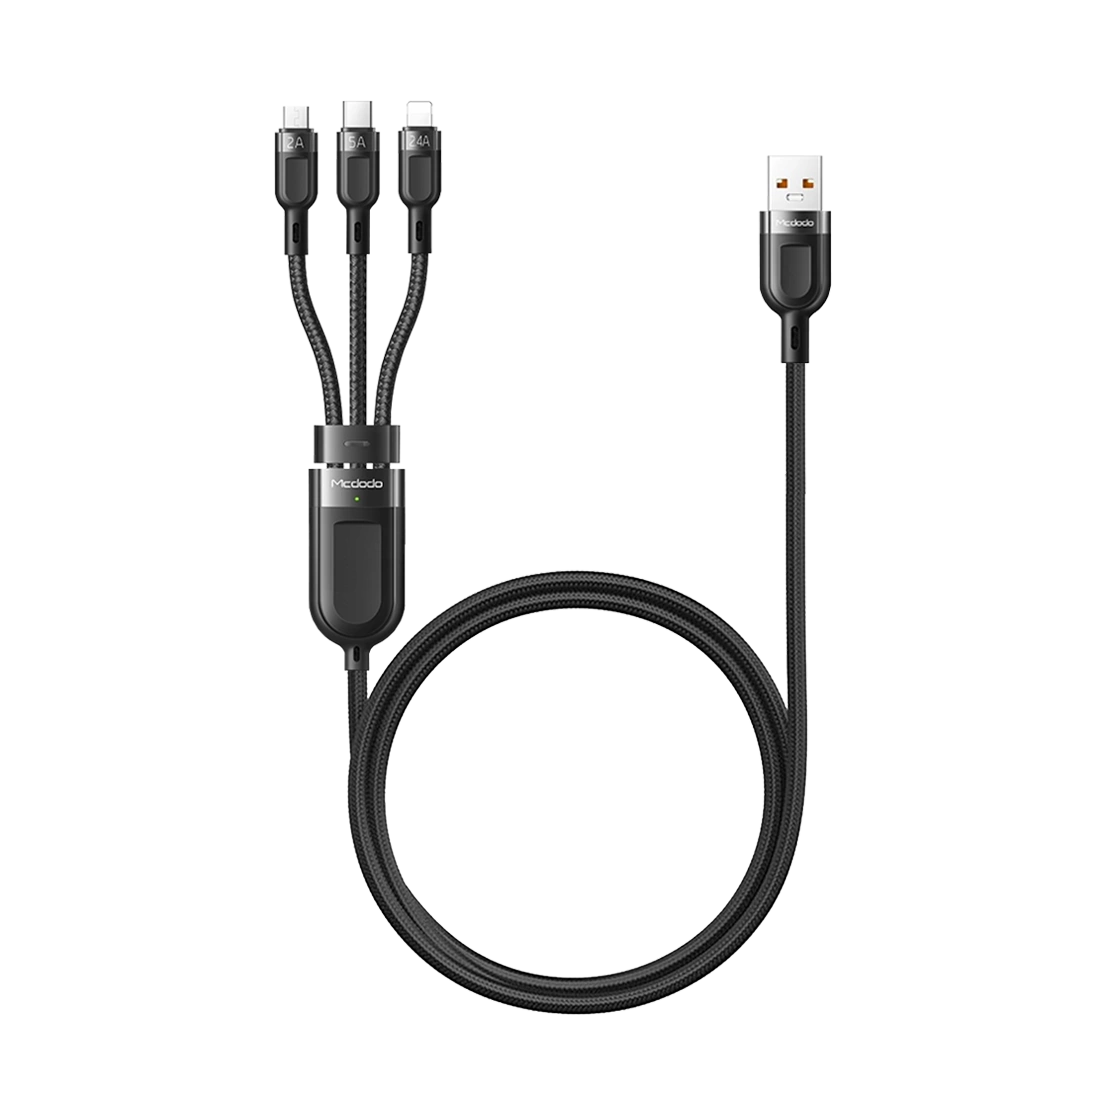 Mcdodo Fast Charger Cable 3 in 1 120cm CA-8790